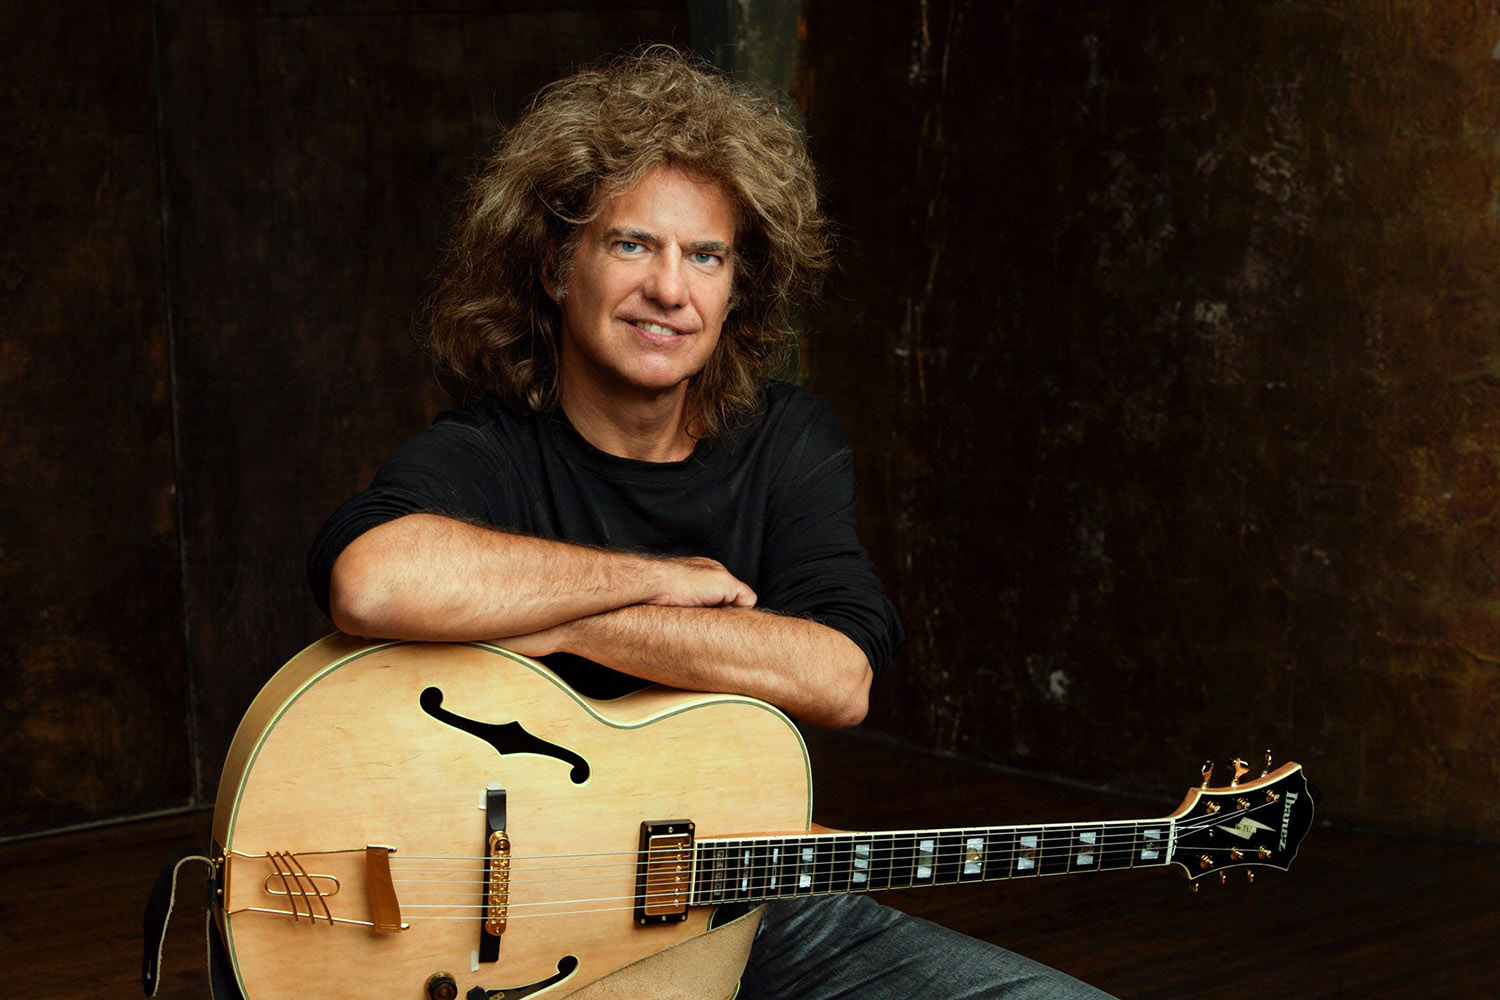 Pat Metheny Group "The Song Book Tour" with Lyle Mays, Steve Rodby & Antonio Sanchez | NN North Sea Jazz Festival